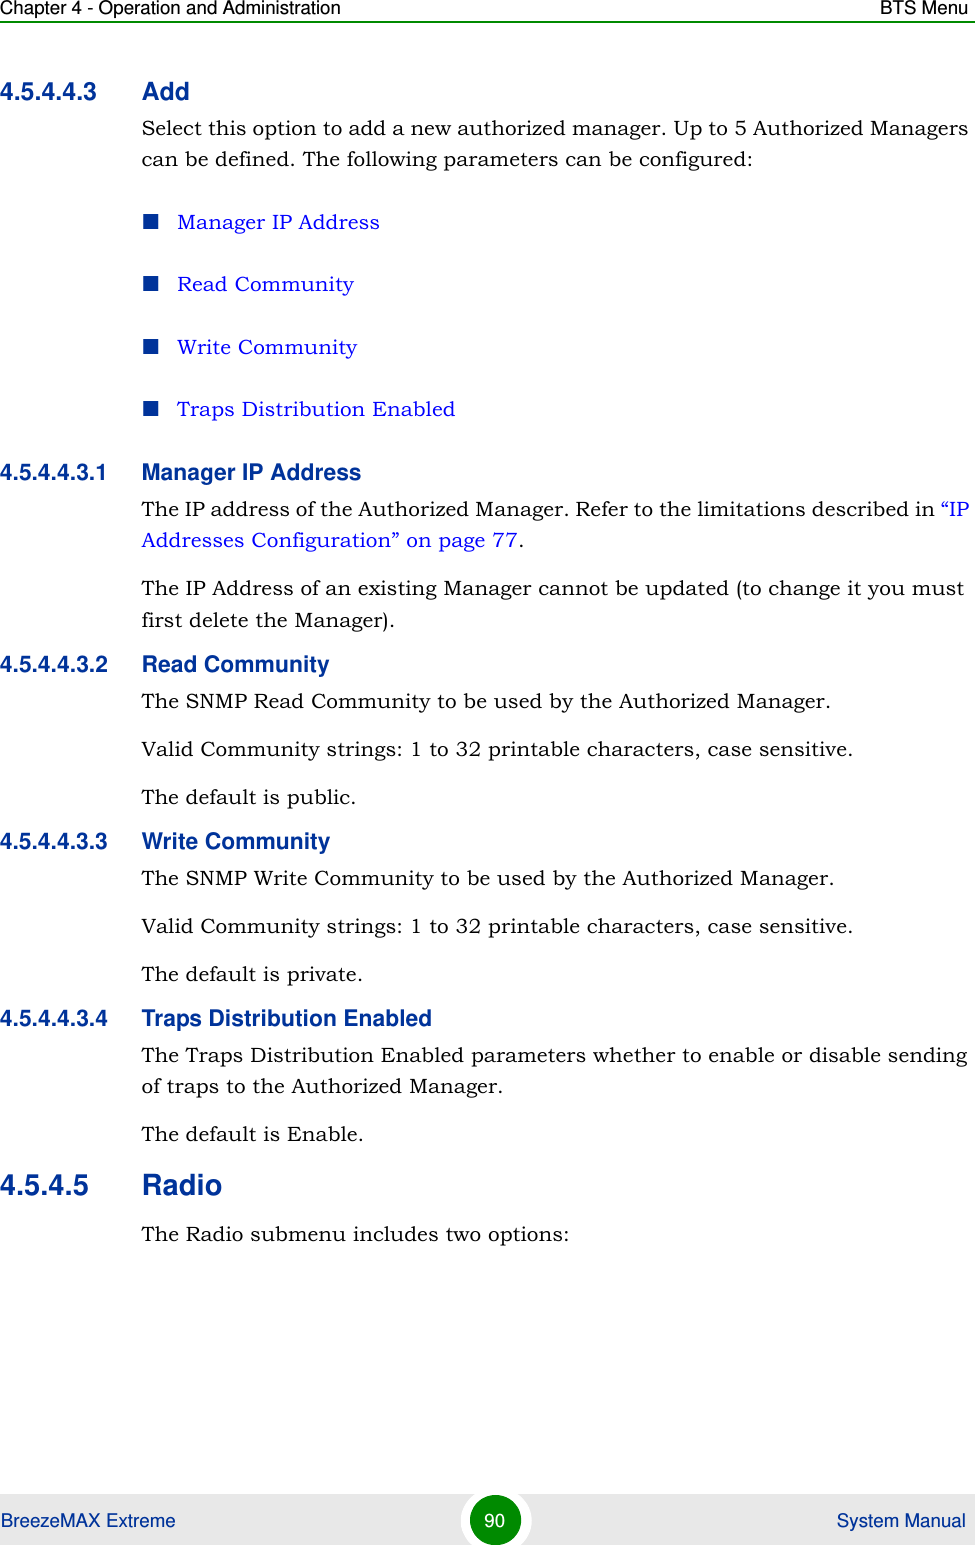 Chapter 4 - Operation and Administration BTS MenuBreezeMAX Extreme 90  System Manual4.5.4.4.3 AddSelect this option to add a new authorized manager. Up to 5 Authorized Managers can be defined. The following parameters can be configured:Manager IP AddressRead CommunityWrite CommunityTraps Distribution Enabled4.5.4.4.3.1 Manager IP AddressThe IP address of the Authorized Manager. Refer to the limitations described in “IP Addresses Configuration” on page 77.The IP Address of an existing Manager cannot be updated (to change it you must first delete the Manager).4.5.4.4.3.2 Read CommunityThe SNMP Read Community to be used by the Authorized Manager.Valid Community strings: 1 to 32 printable characters, case sensitive.The default is public.4.5.4.4.3.3 Write CommunityThe SNMP Write Community to be used by the Authorized Manager.Valid Community strings: 1 to 32 printable characters, case sensitive.The default is private.4.5.4.4.3.4 Traps Distribution EnabledThe Traps Distribution Enabled parameters whether to enable or disable sending of traps to the Authorized Manager.The default is Enable.4.5.4.5 RadioThe Radio submenu includes two options: